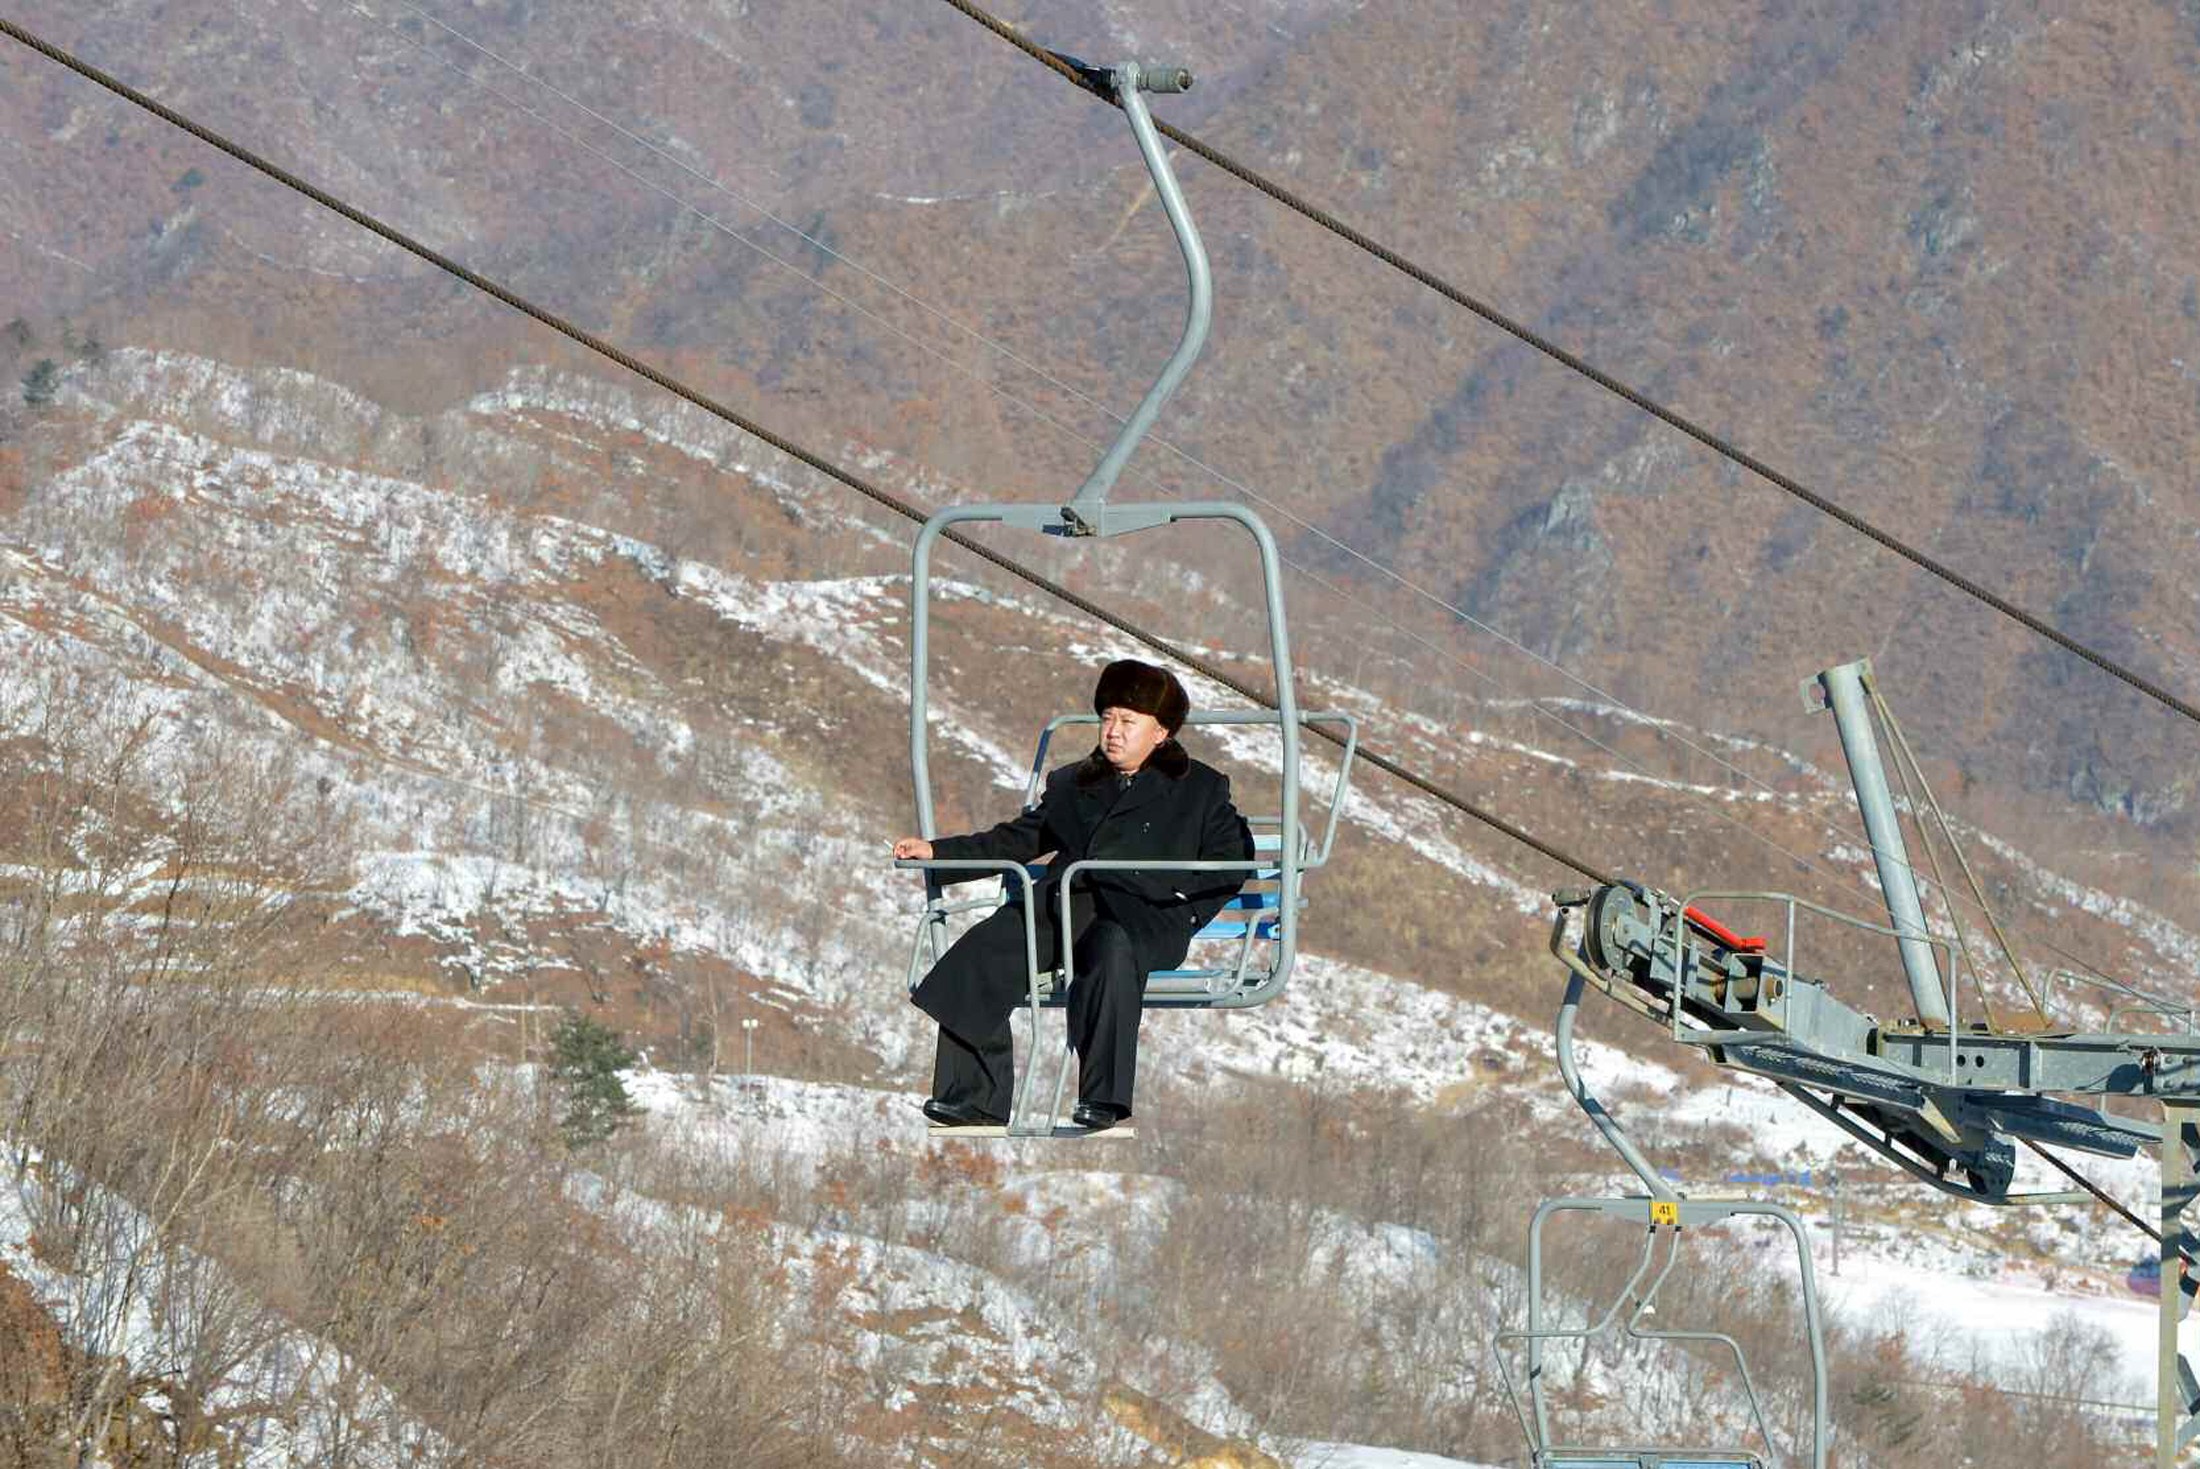 North Korean leader Kim Jong Un sits on a ski lift during a visit to a newly built ski resort in the Masik Pass region. Photo: Reuters